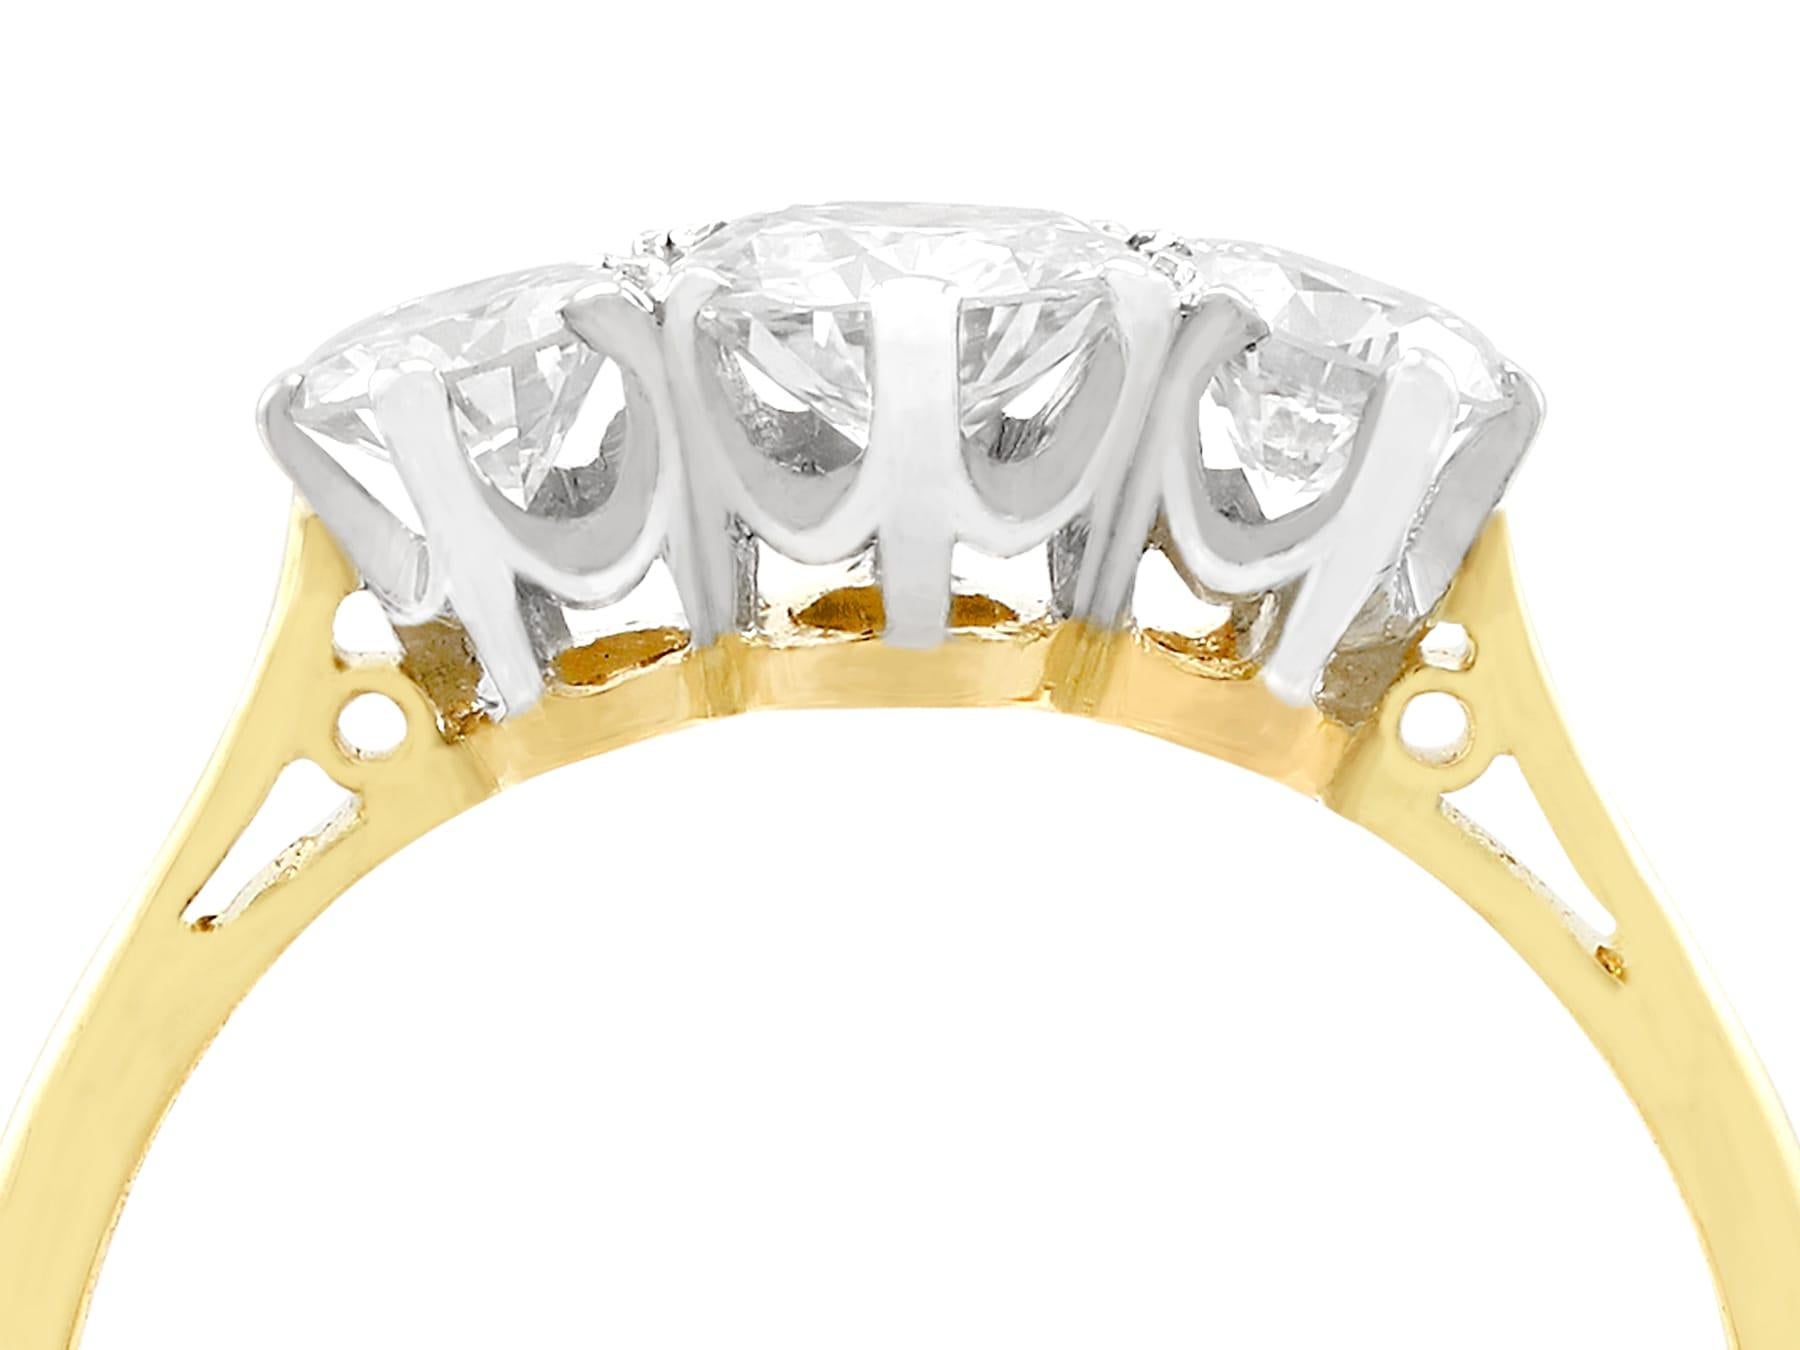 An impressive antique 1930s 0.75 carat diamond and 18 karat yellow gold, platinum set trilogy ring; part of our diverse antique jewelry collections.

This fine and impressive three stone diamond ring has been crafted in 18k yellow gold with a